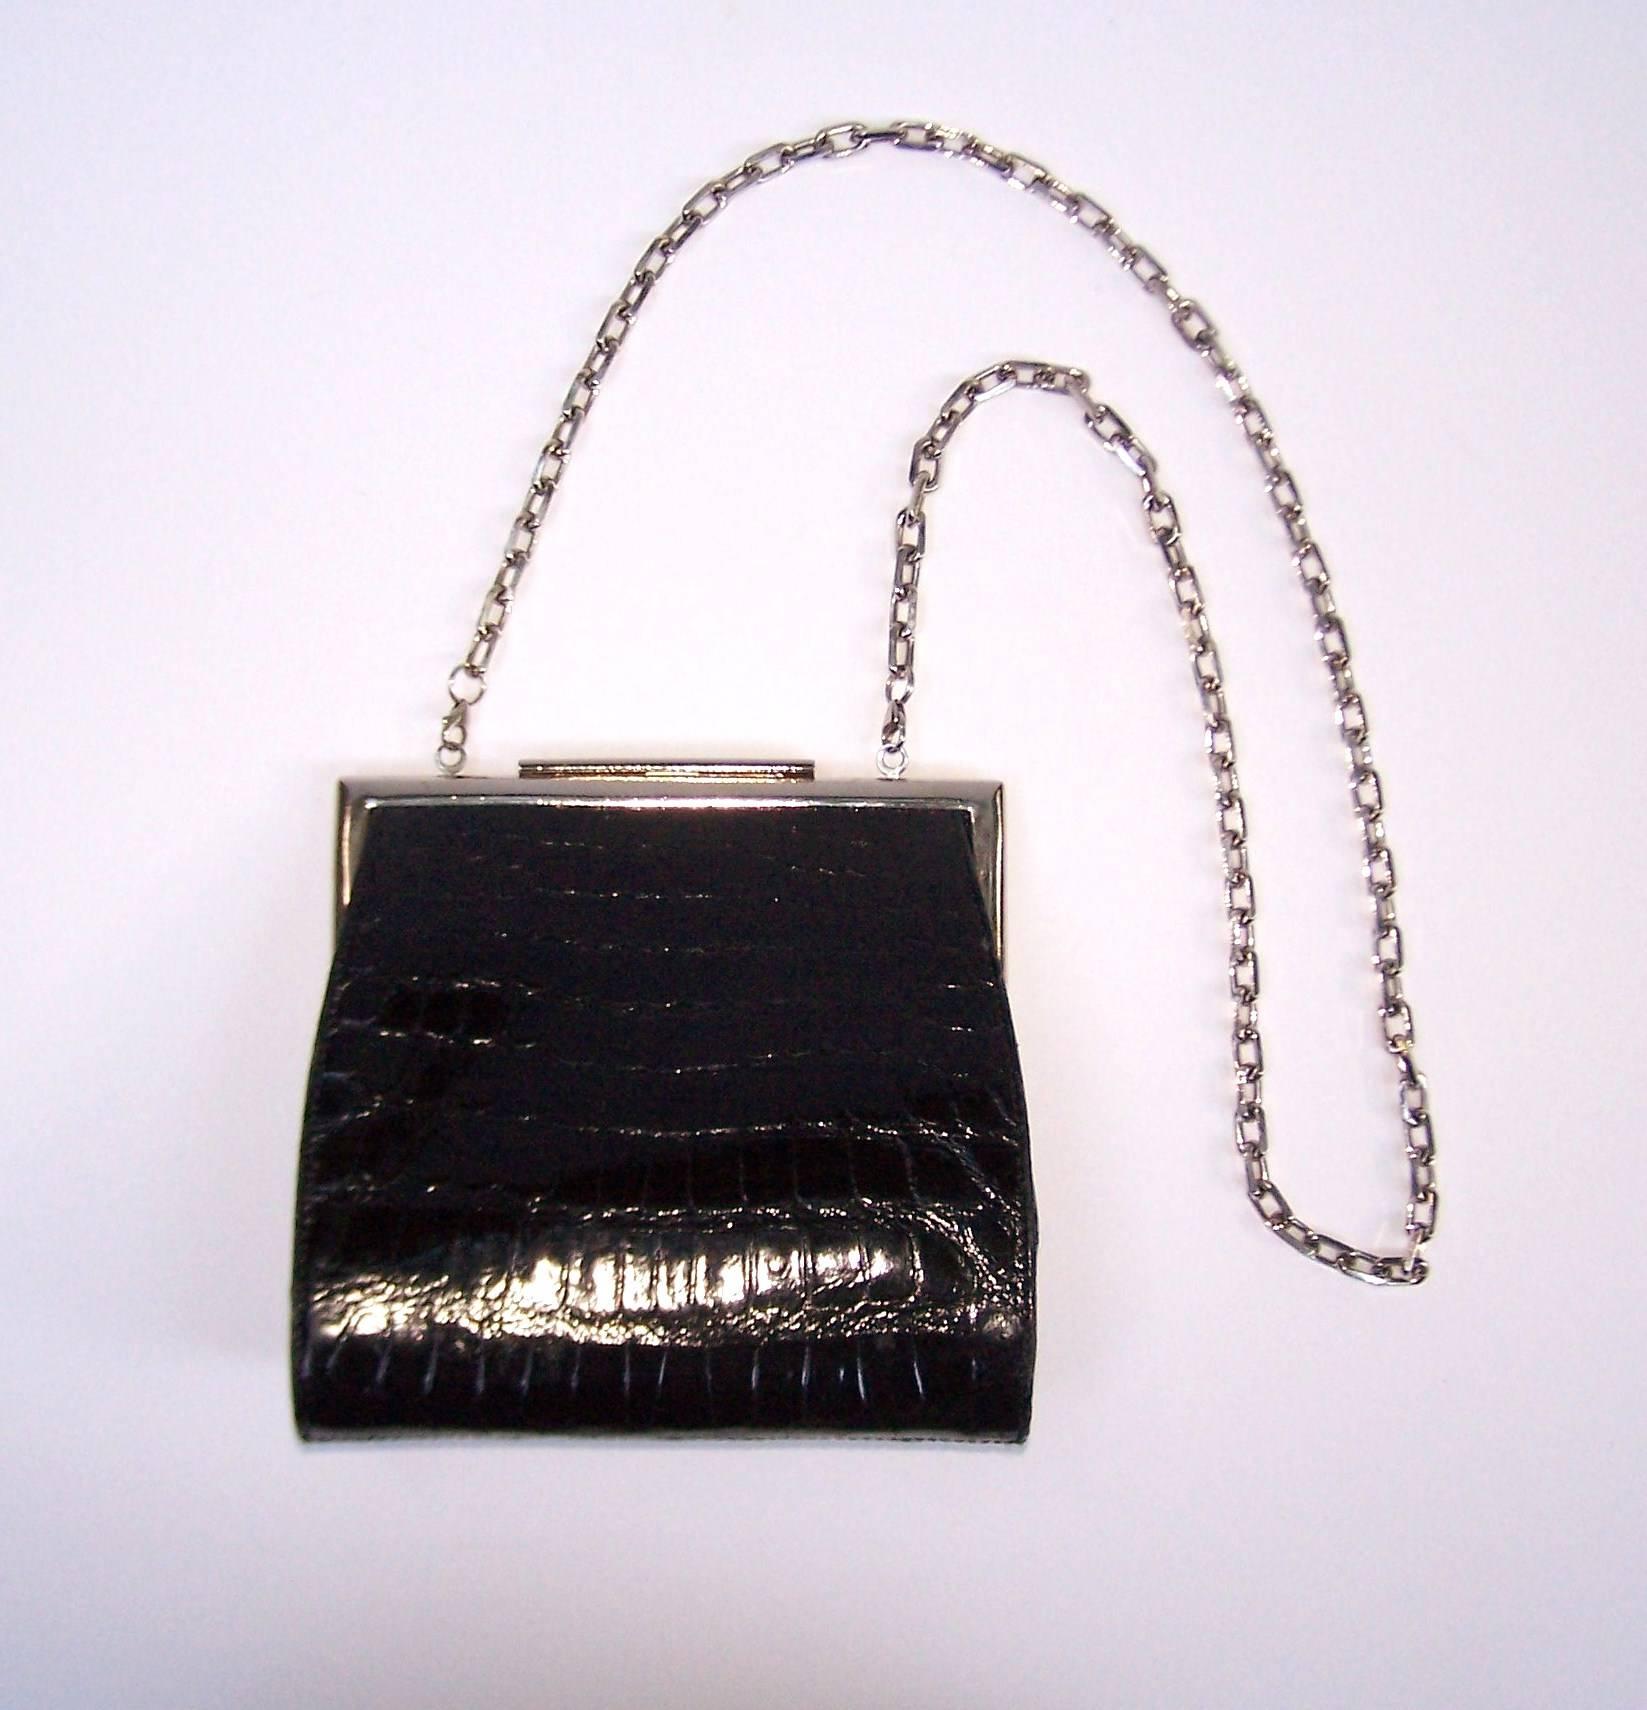 This Calvin Klein black alligator handbag can go from a sophisticated biker look to a demure ladylike look all with a change of the shoulder chain.  The bag measures 7.5" across x 2.38" deep x 7.25" tall with gray nubuck interior. 